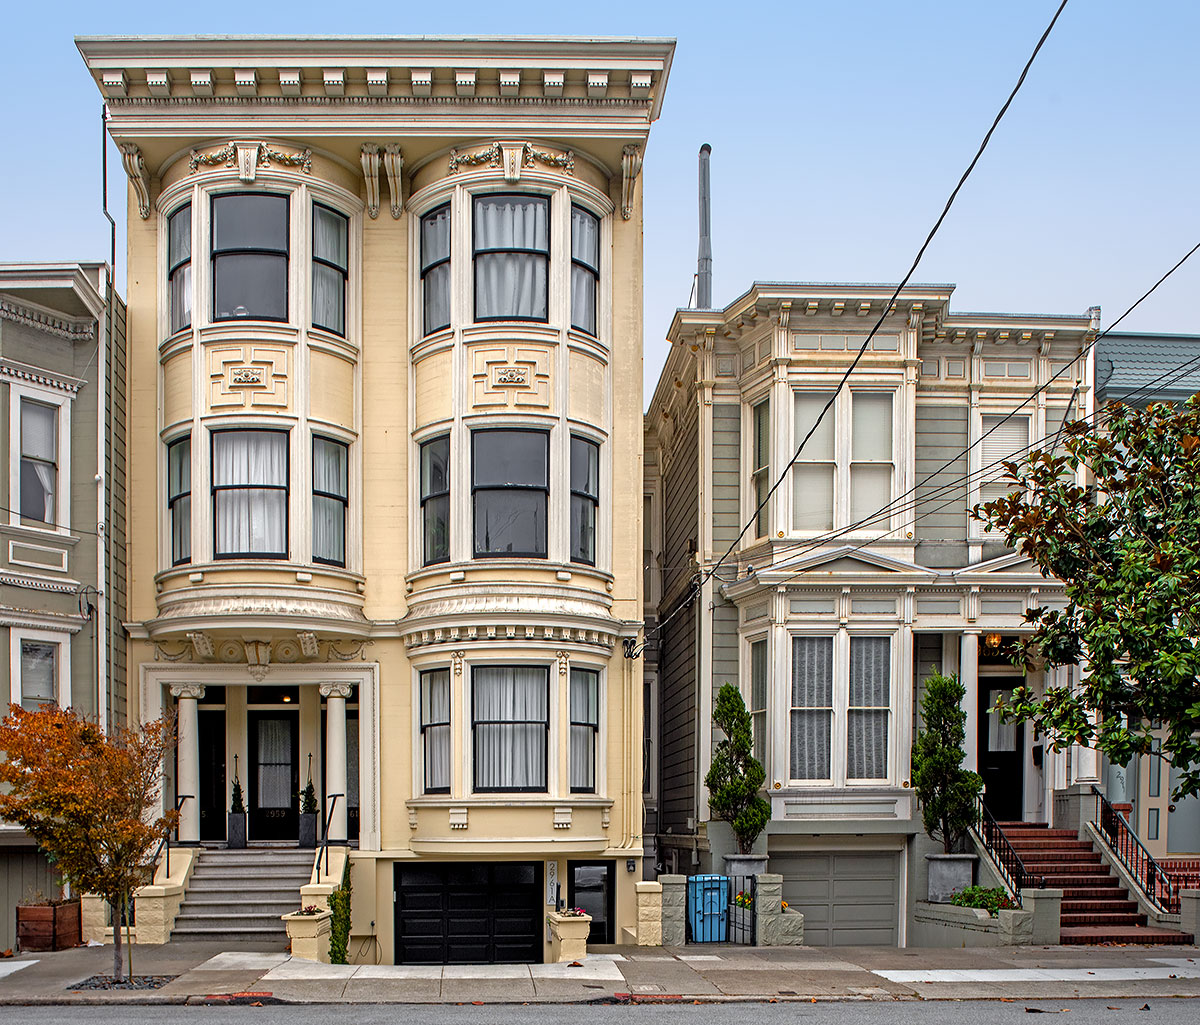 2957 Washington Street in Pacific Heights was designed by Havens & Toepke and built in 1901.